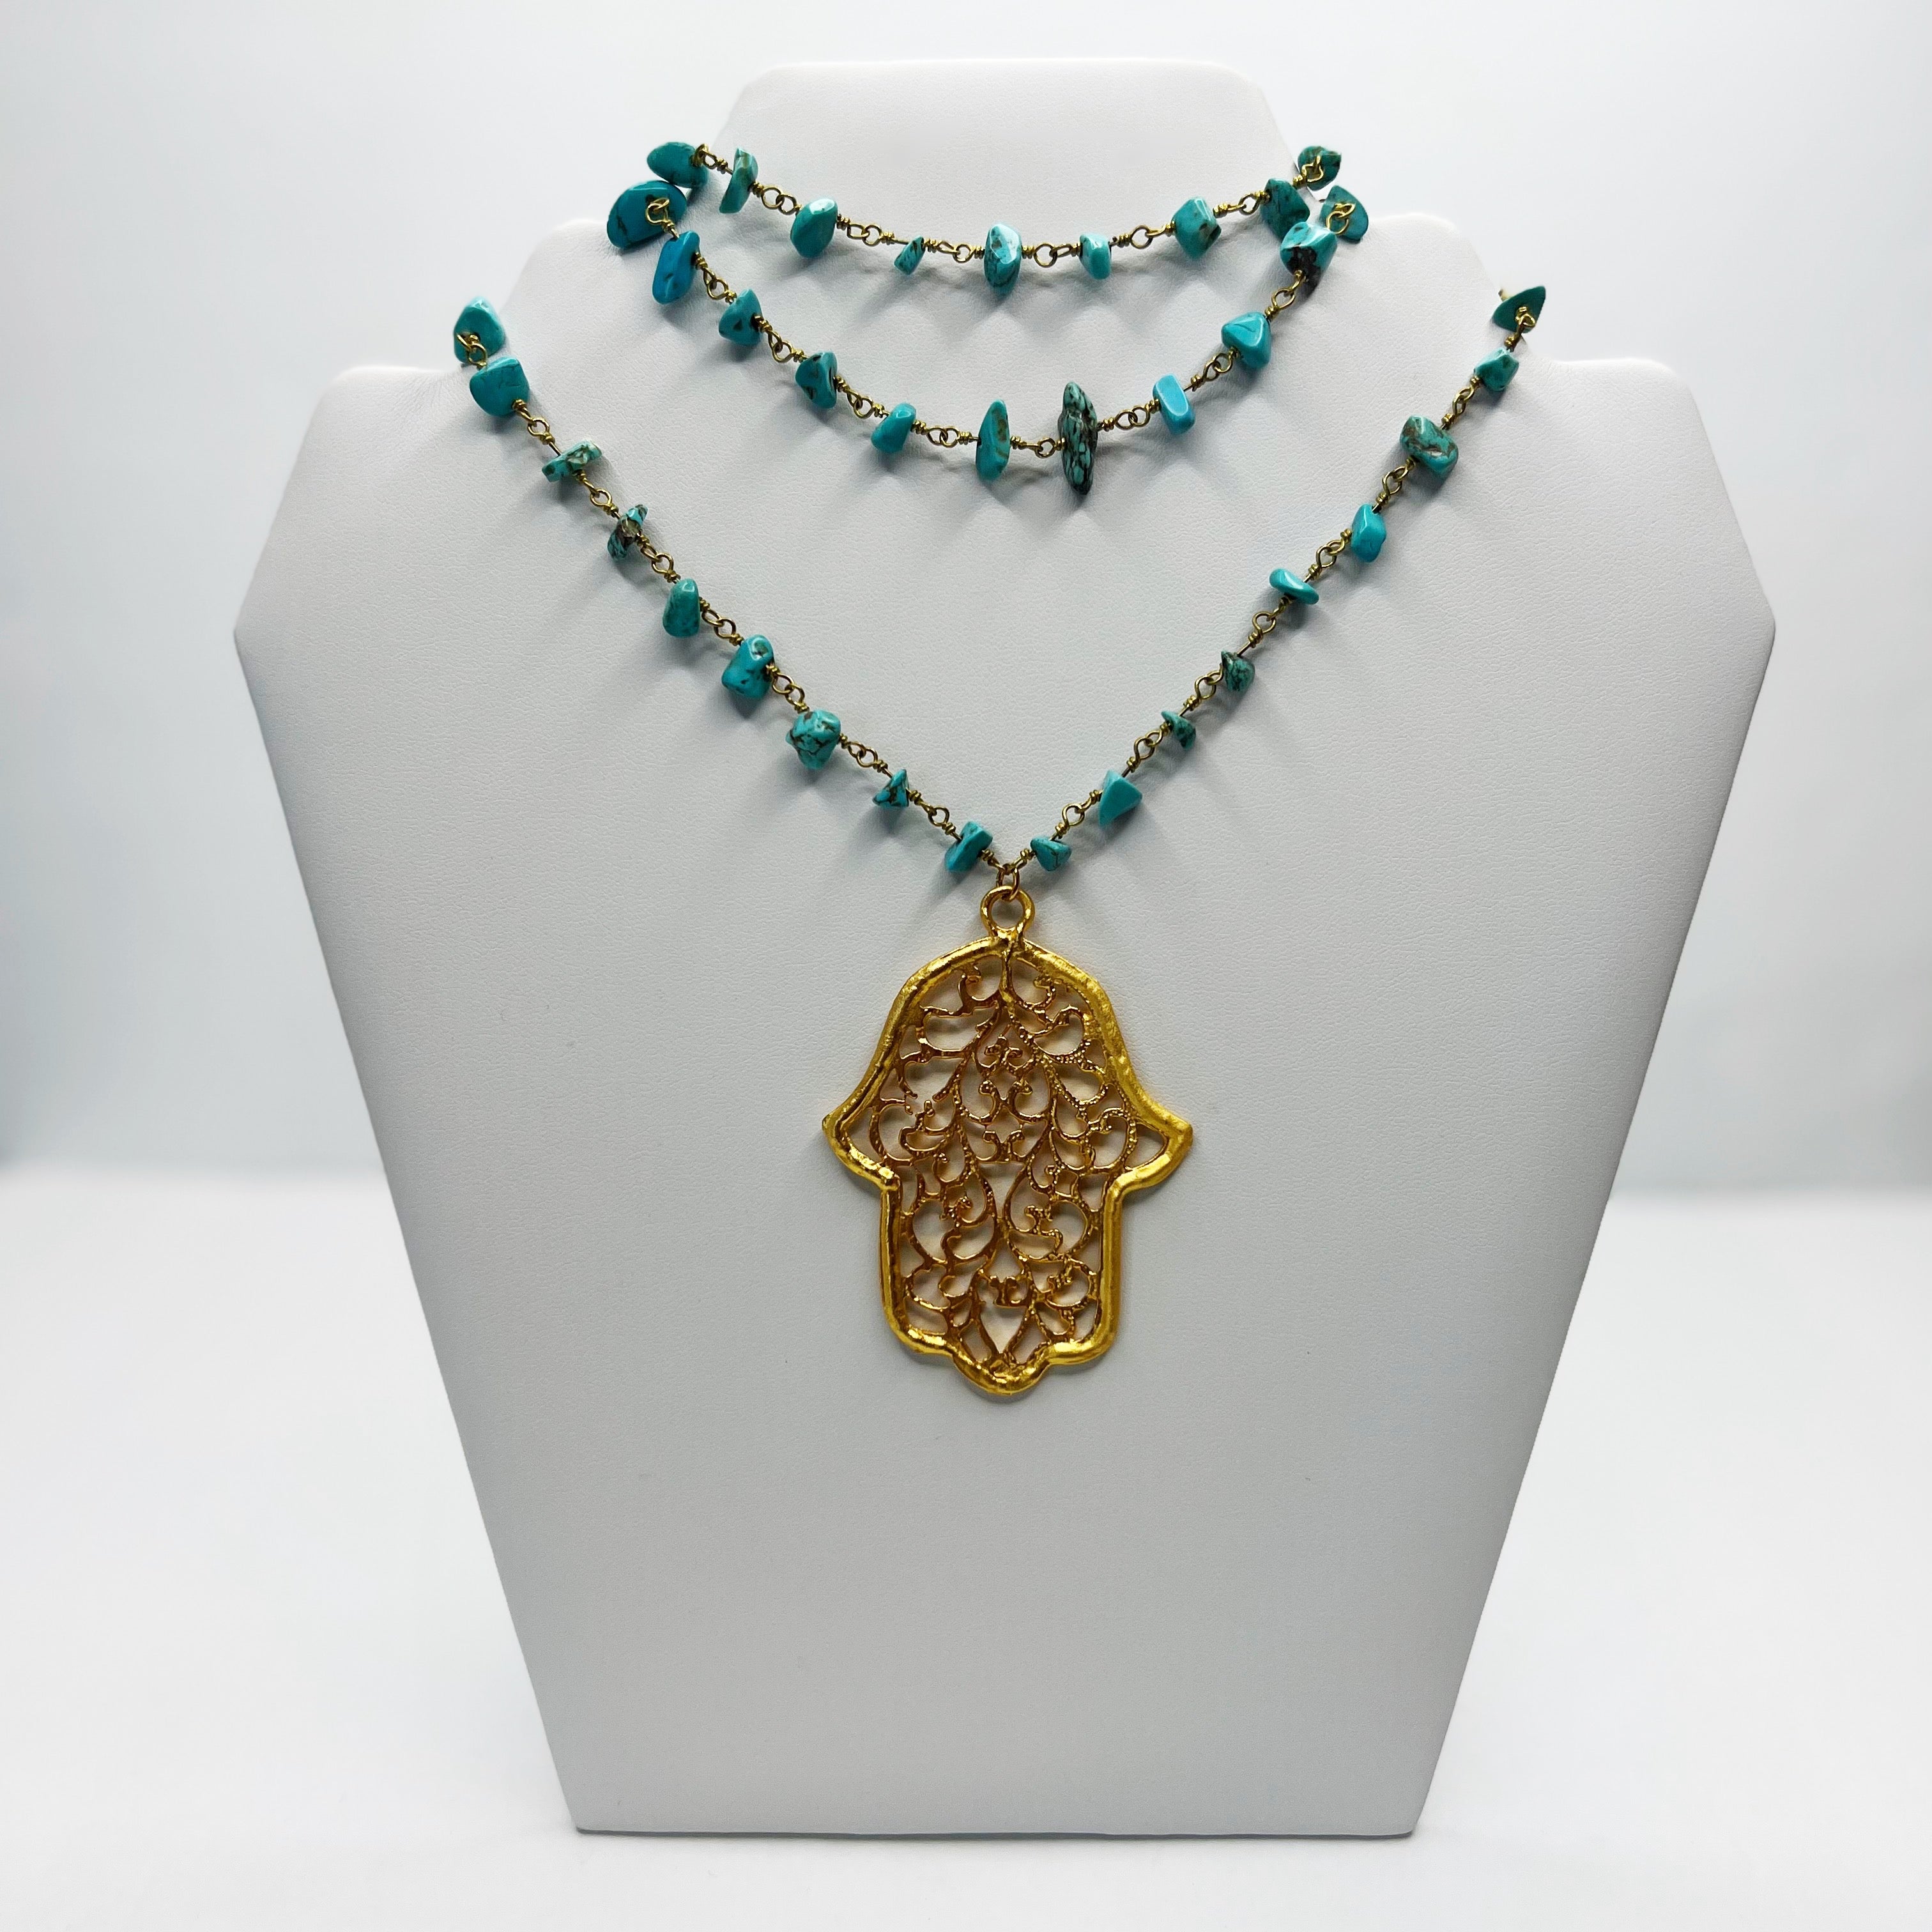 Turquoise Gemstone Chips Chain with Gold Filigree Hamsa Necklace